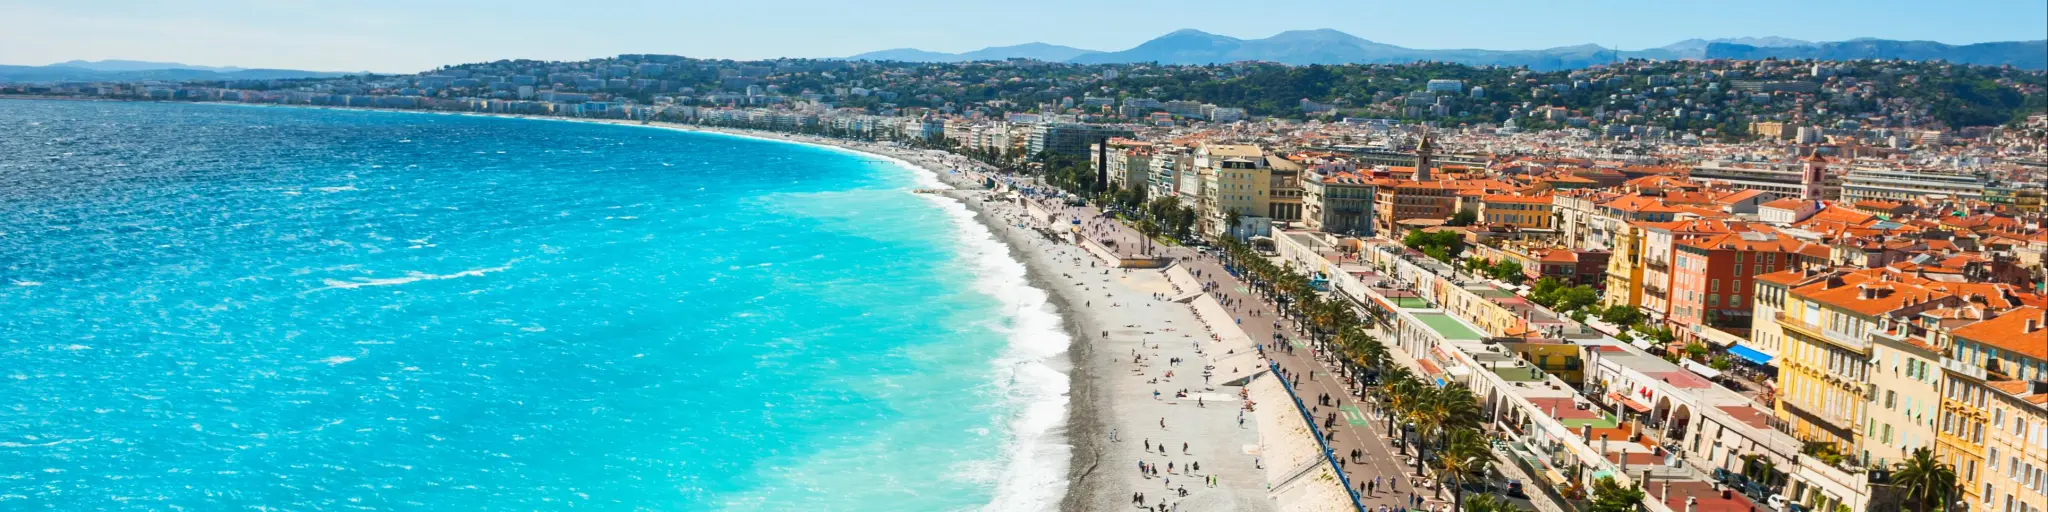 Panoramic view of the sea coast in Nice, France